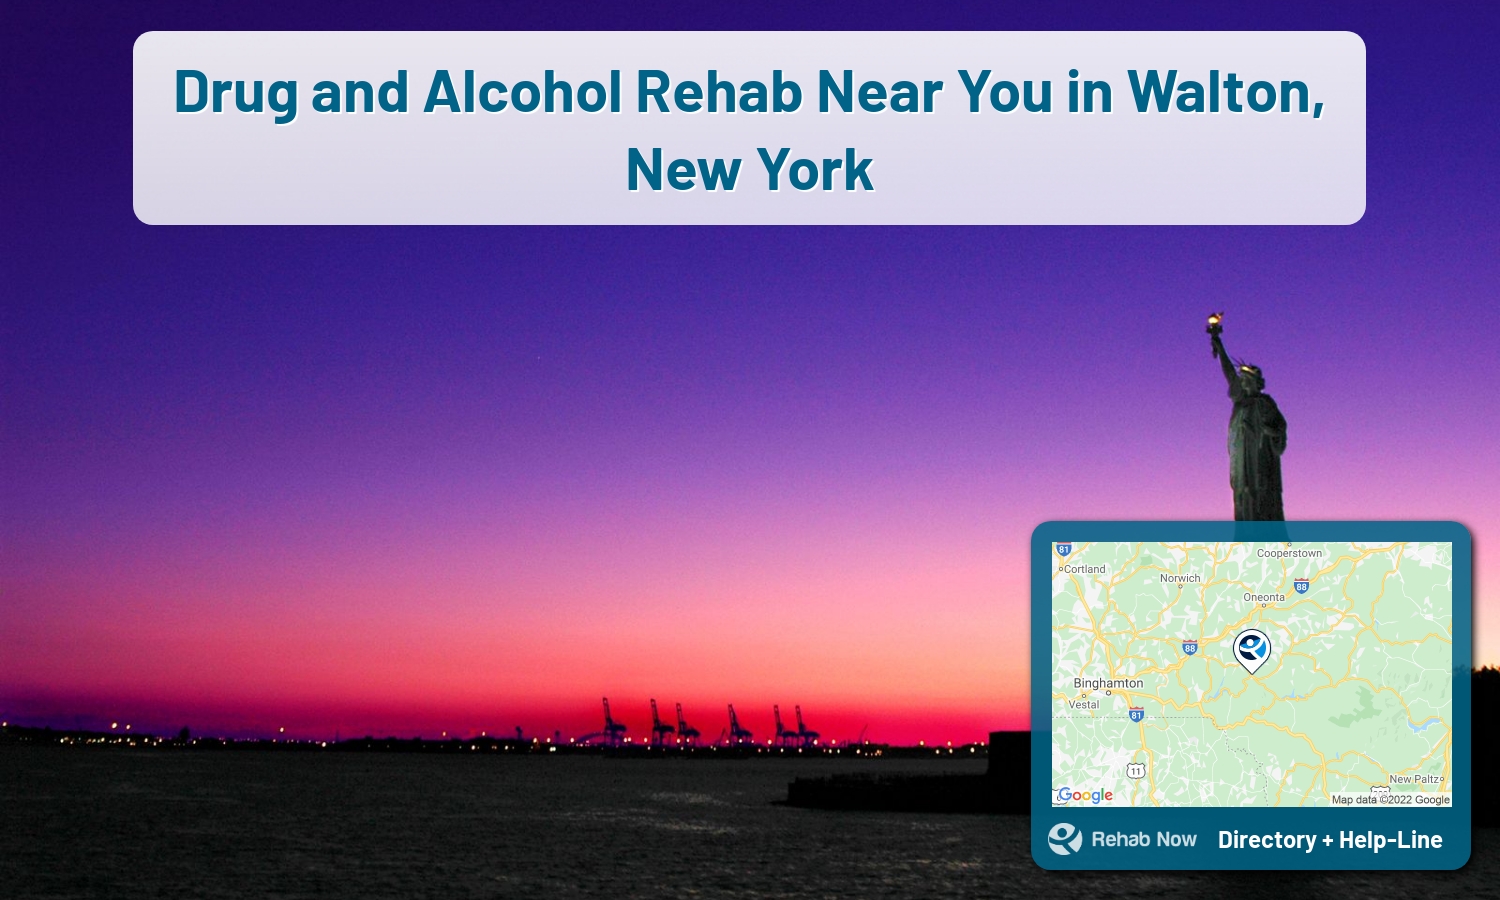 Drug rehab and alcohol treatment services nearby Walton, NY. Need help choosing a treatment program? Call our free hotline!